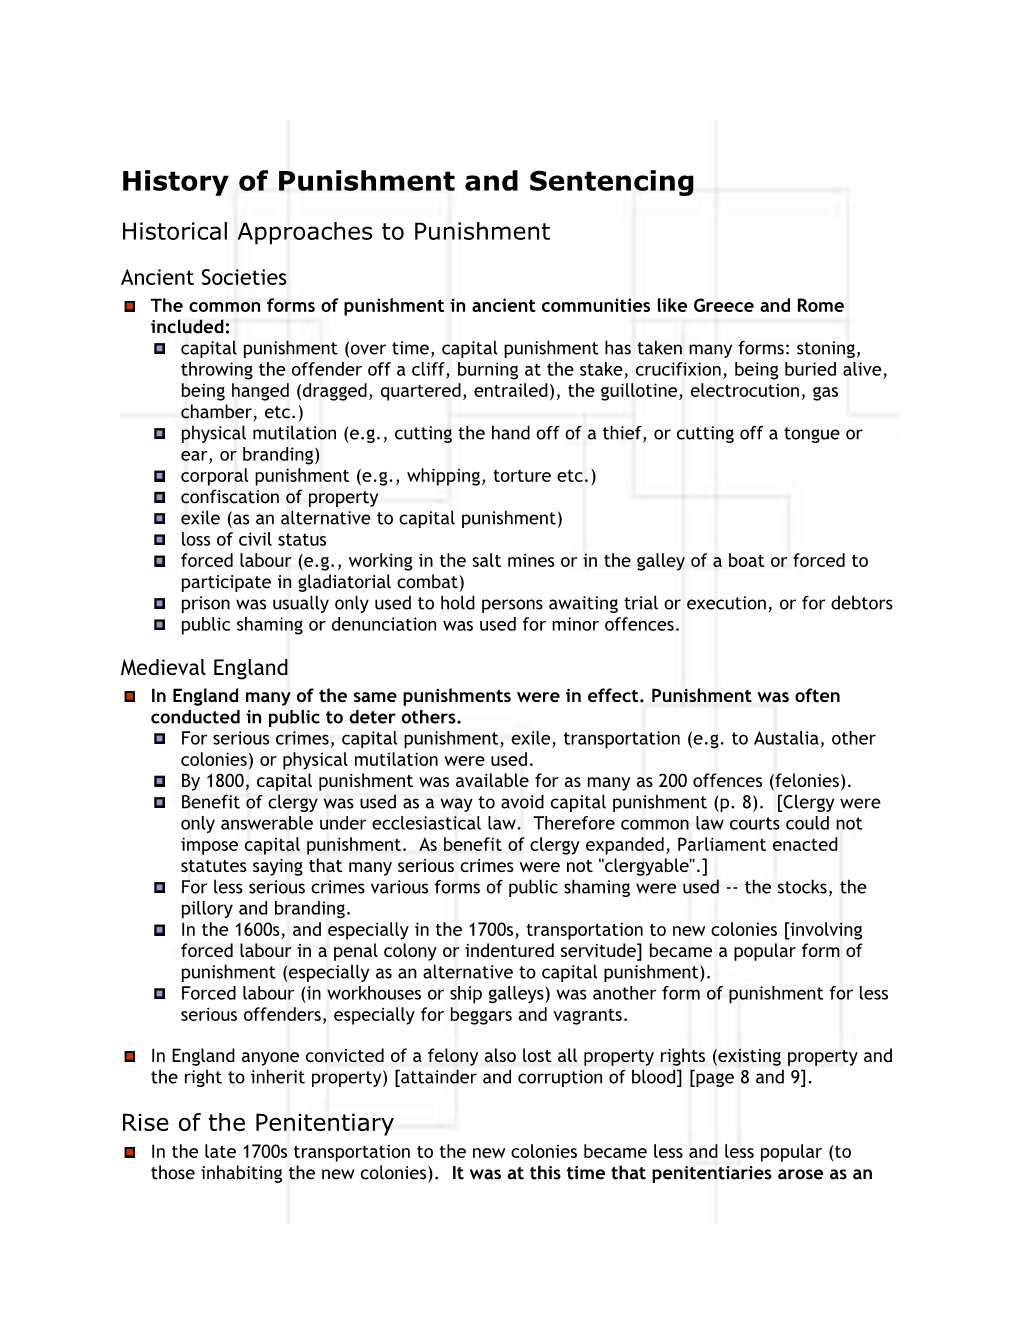 History of Punishment and Sentencing